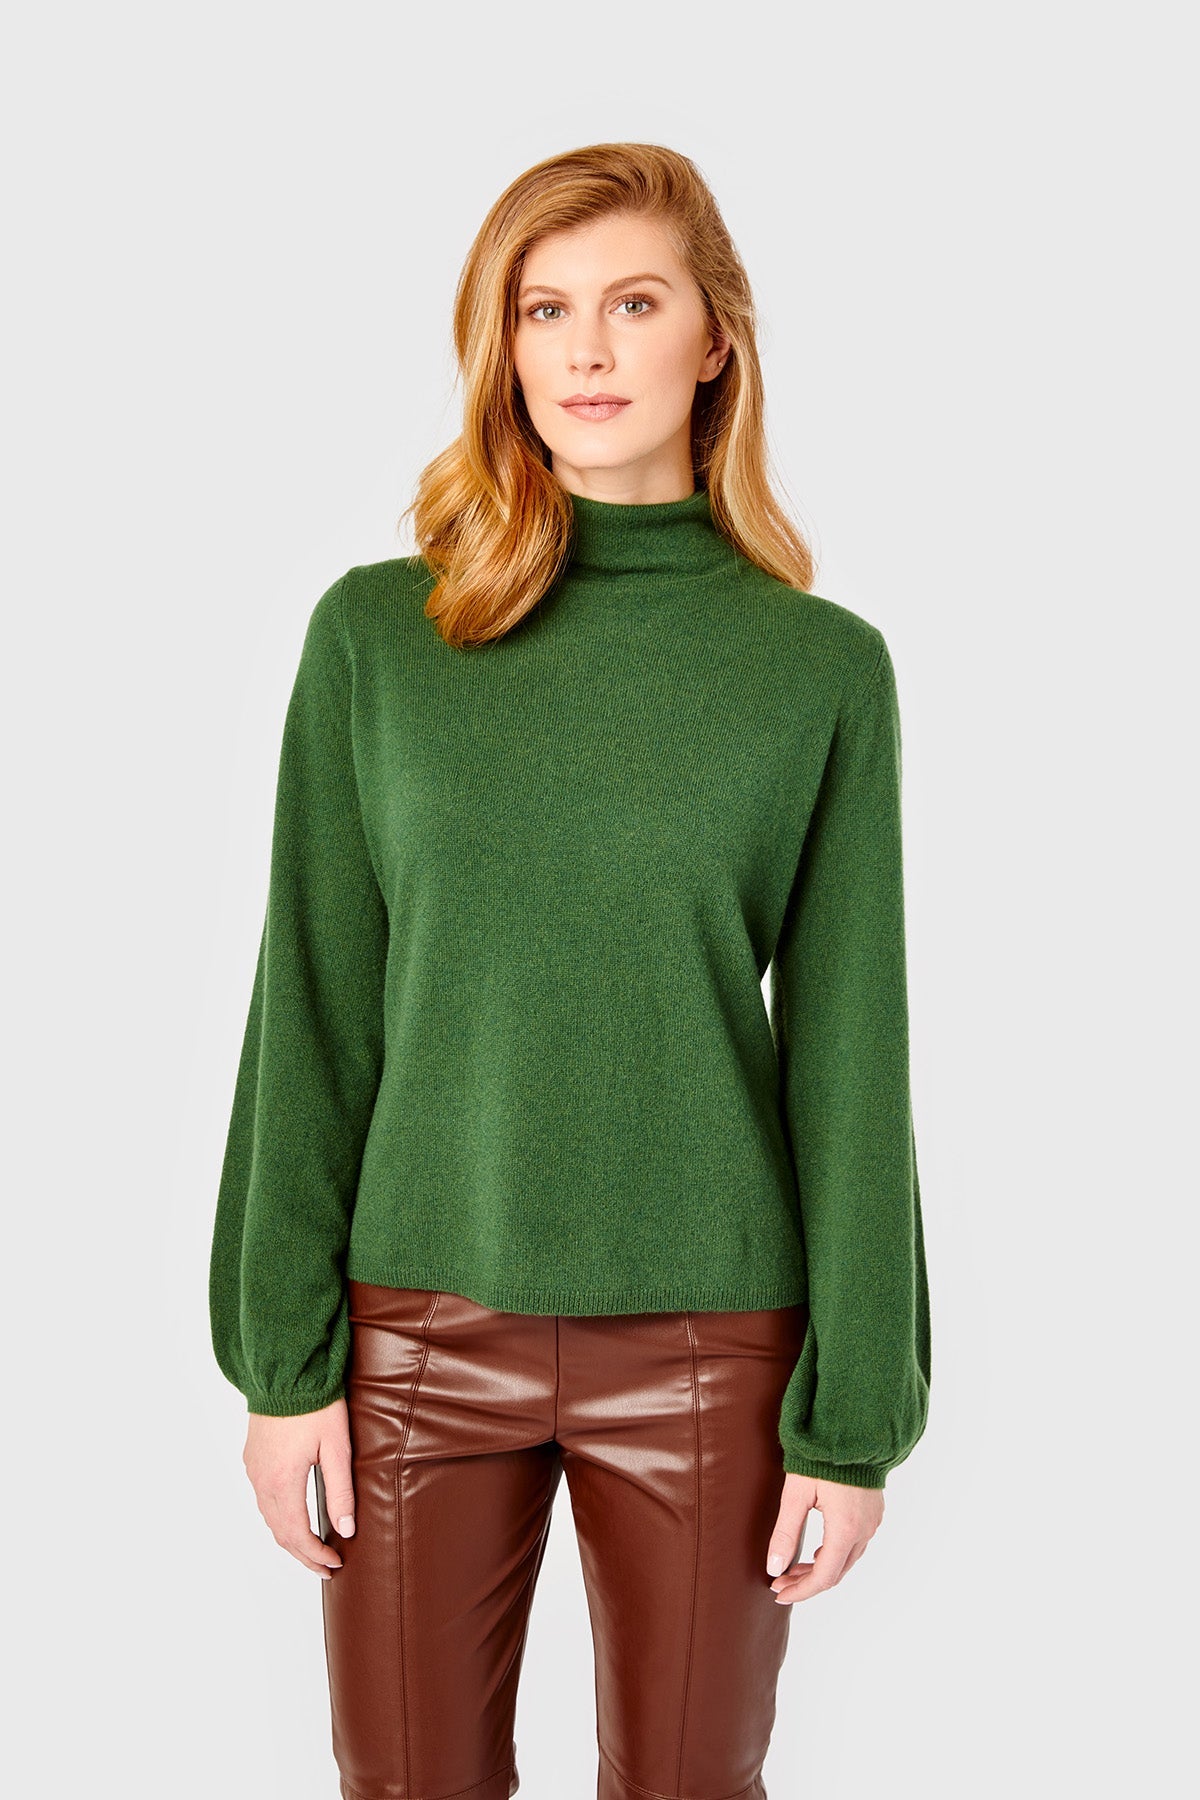 Willow Sweater-Cashmere-Olive by Cartolina